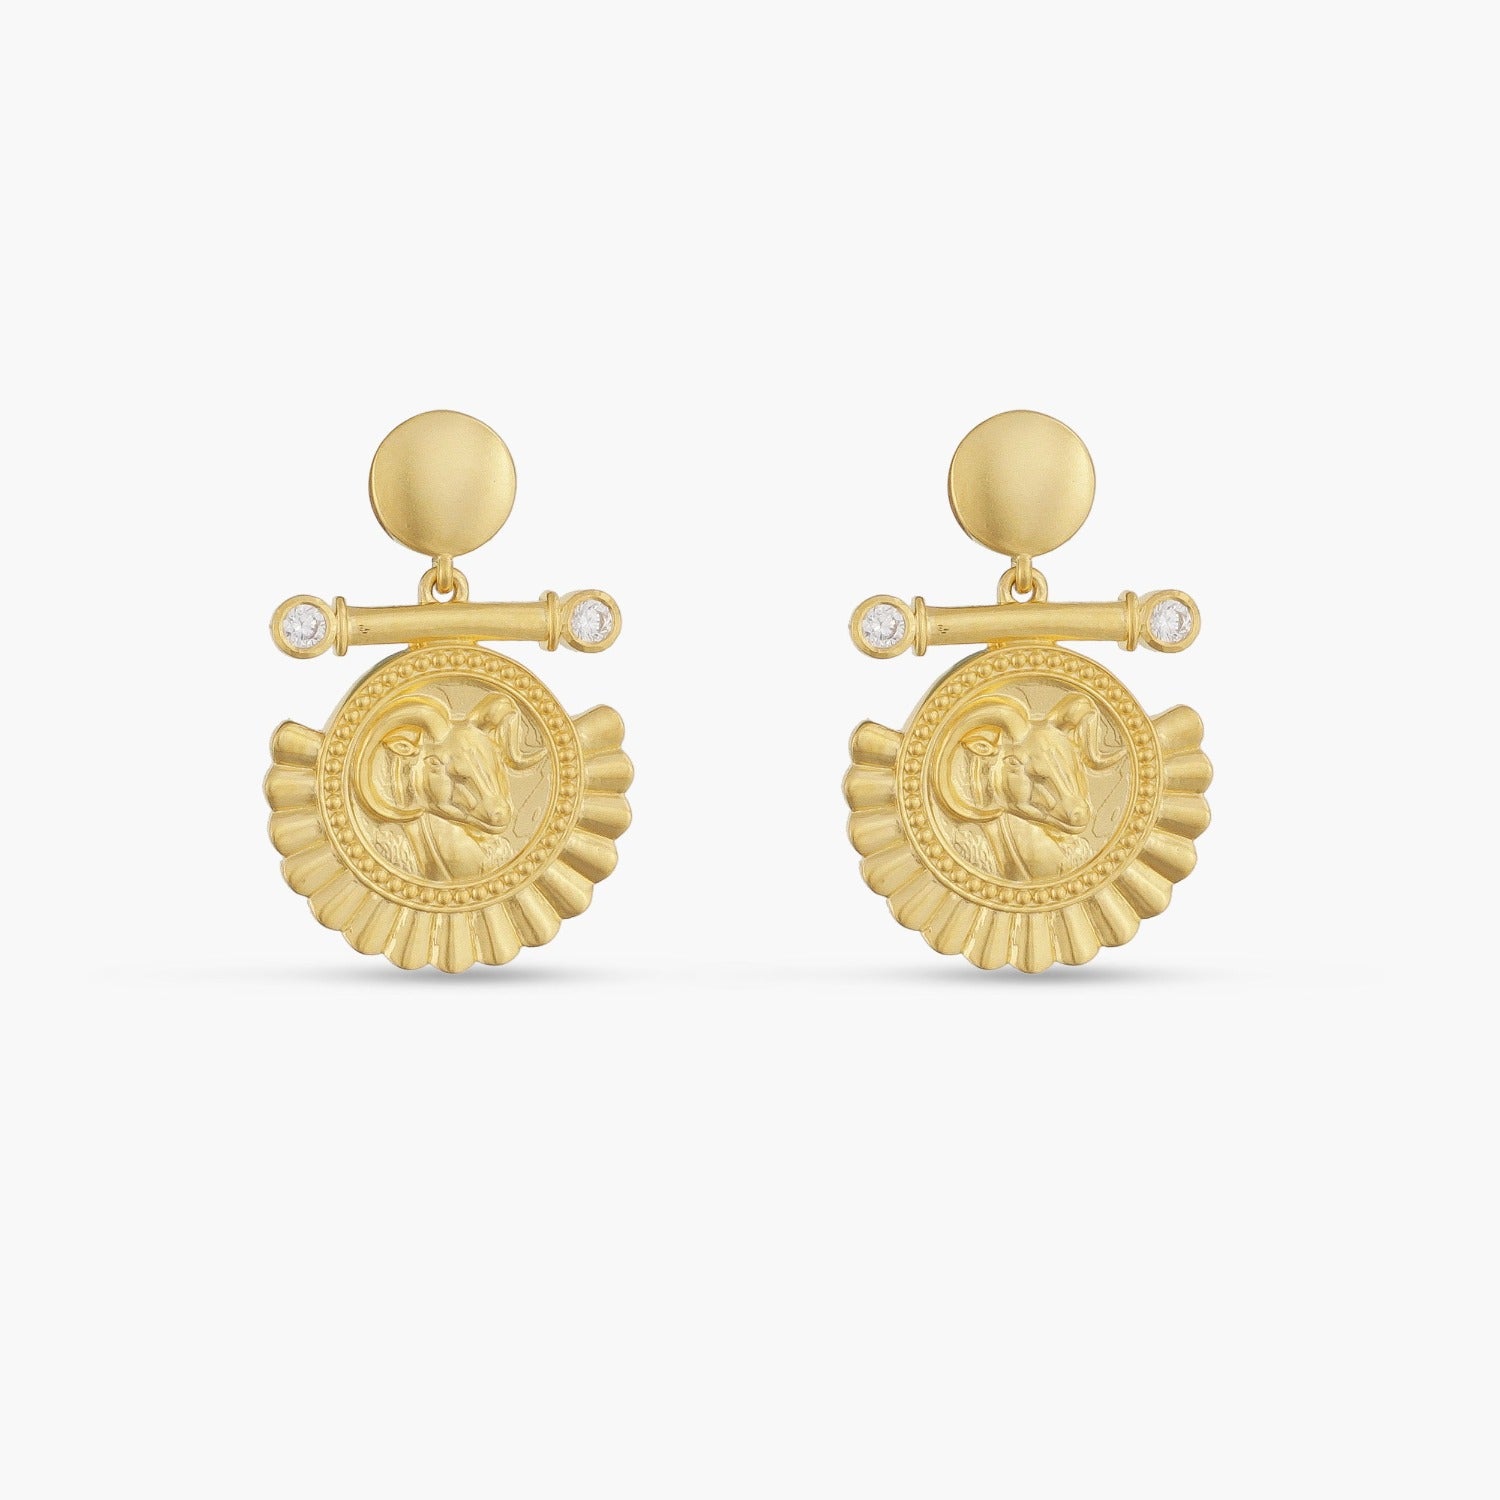 Antique Griffin Conversion Earrings of 14k Gold - Trademark Antiques